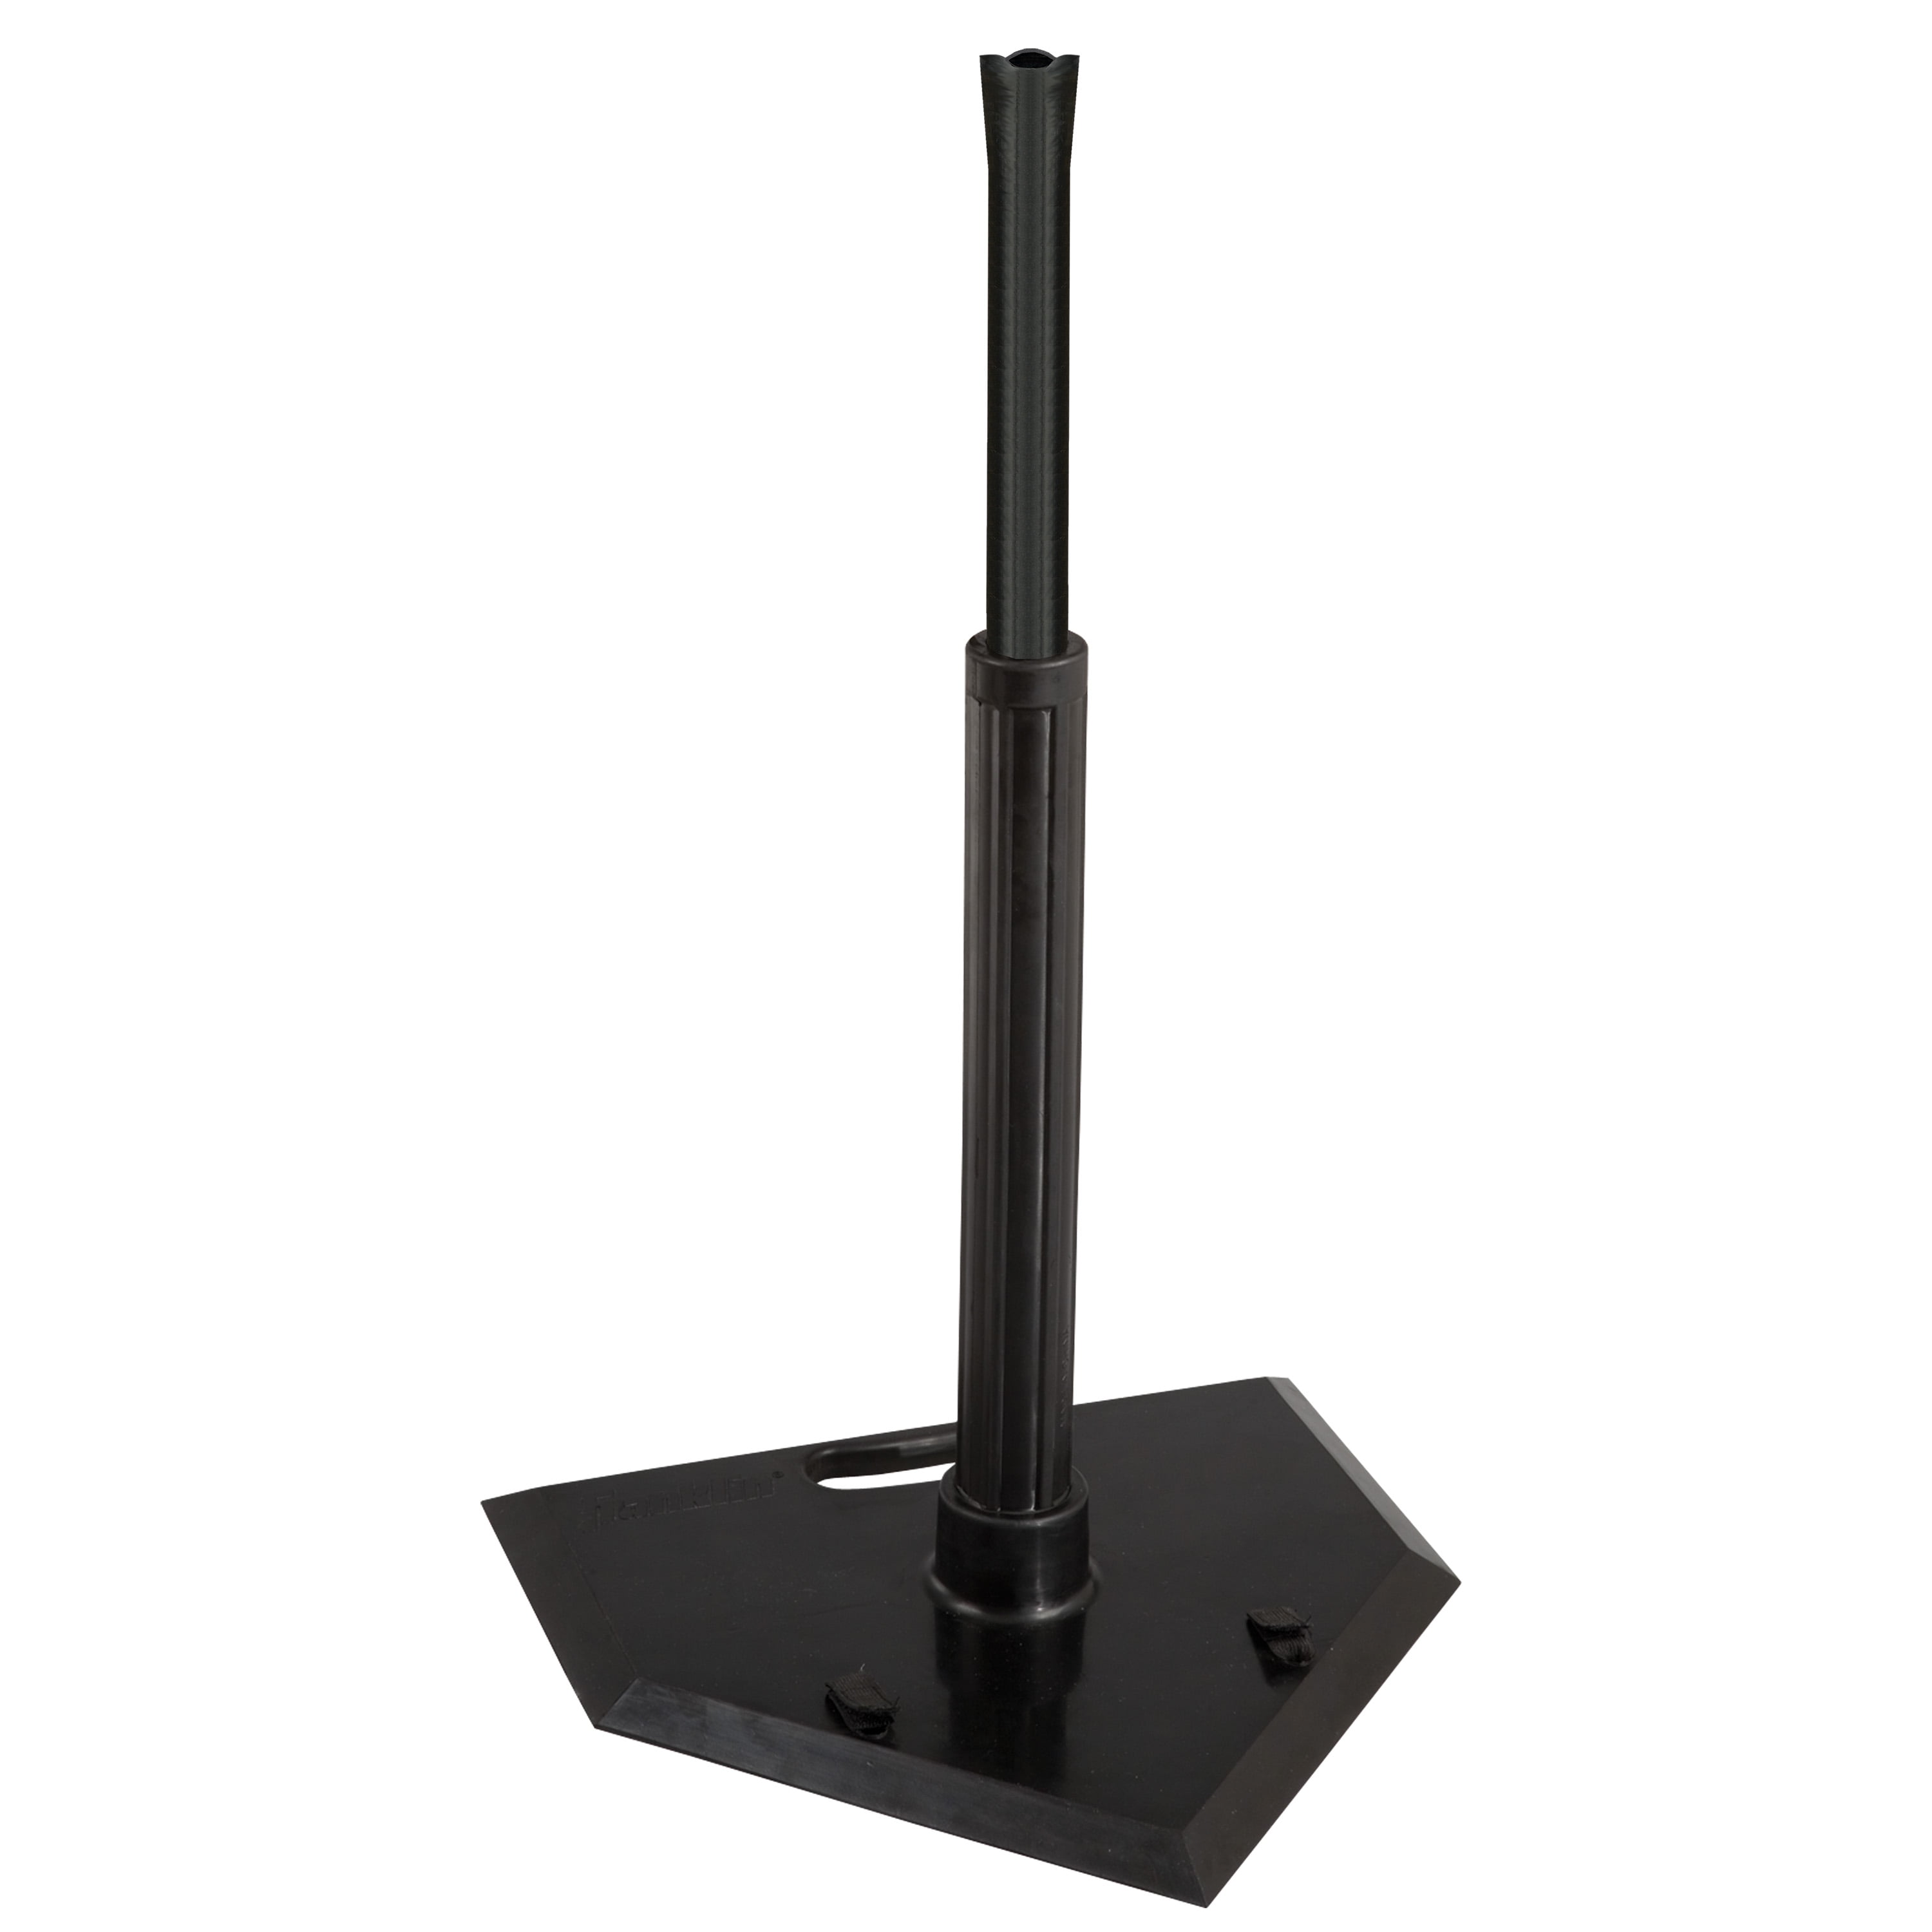 CHAMPRO Heavy Duty Reinforced Rubber Batting Tee, Adjustable from 8 to 8  inches